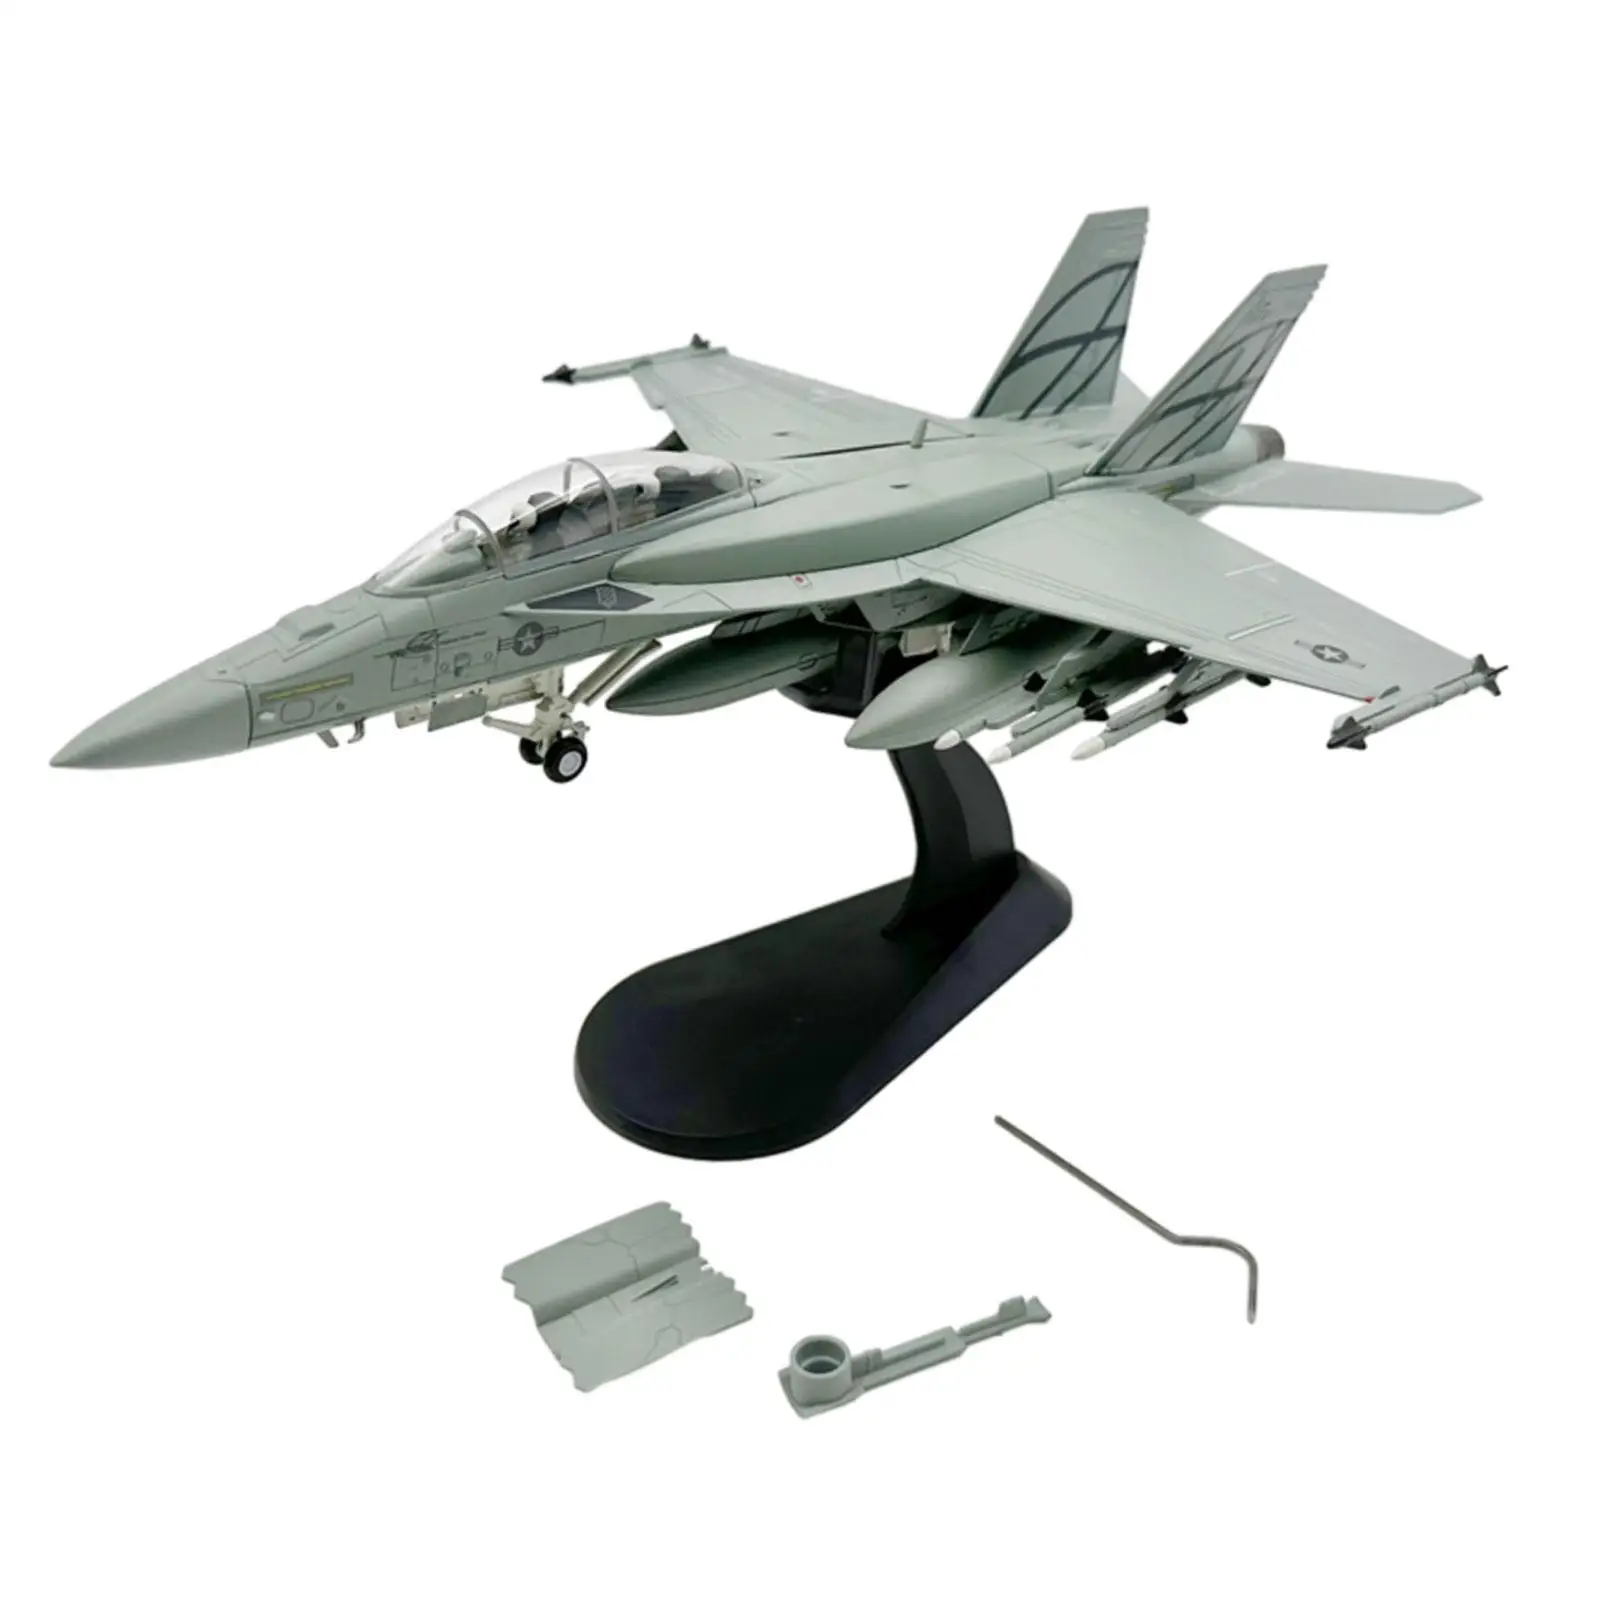 1/72 Scale Diecast Alloy Model Aircraft Collectibles for Collection Gift